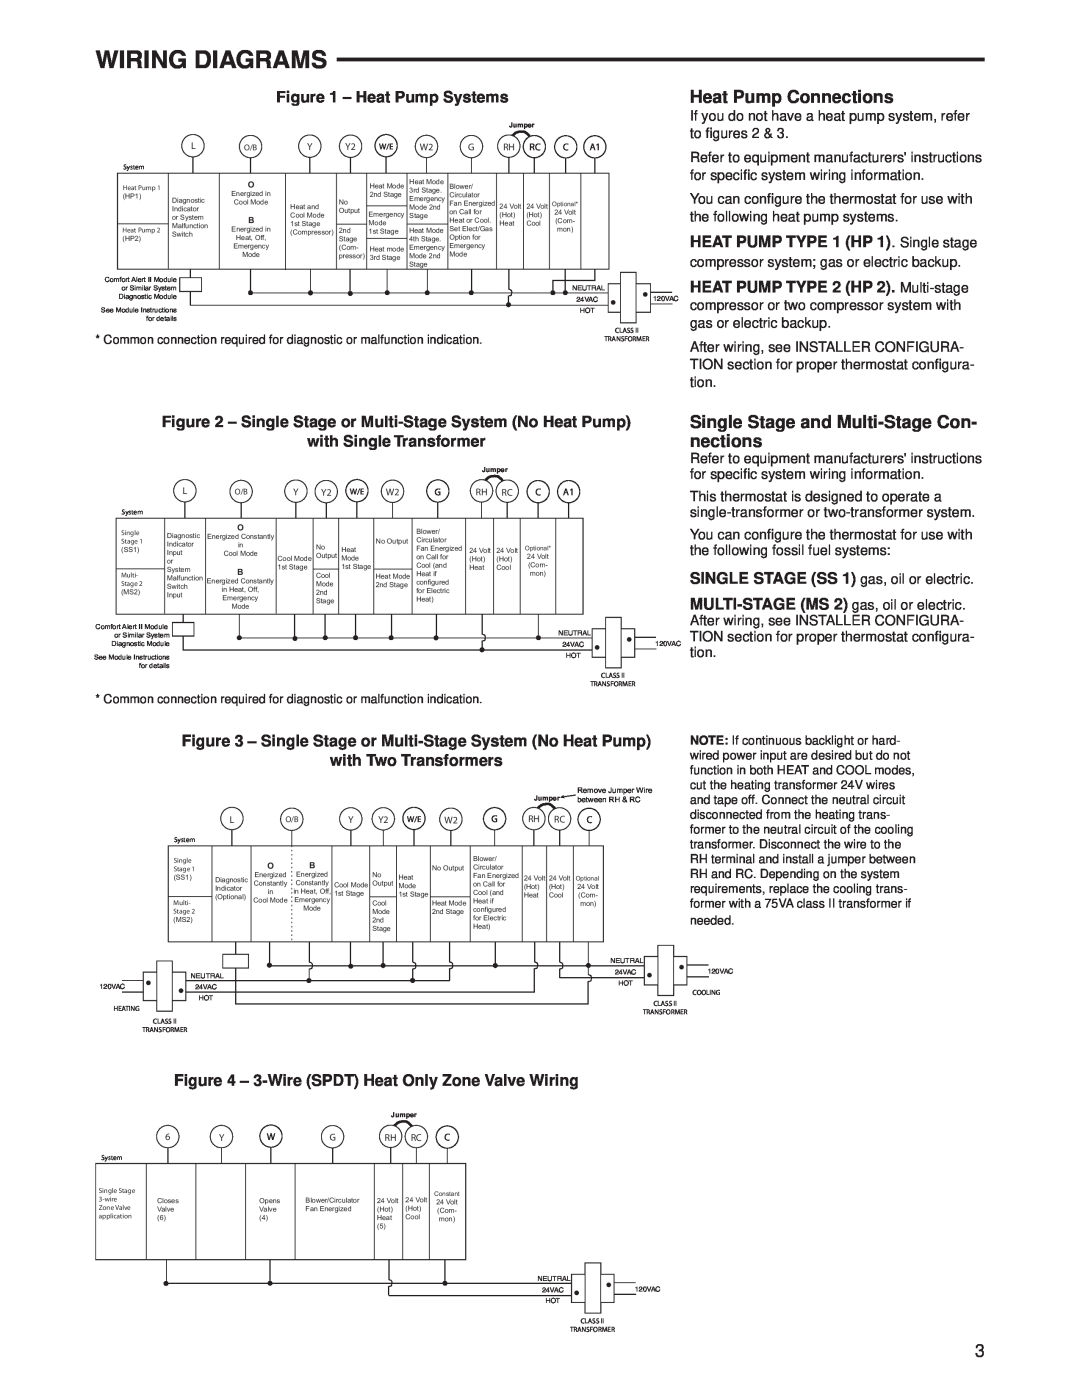 White Rodgers 1F95-0680 specifications Wiring Diagrams, Heat Pump Systems, with Single Transformer, Heat Pump Connections 